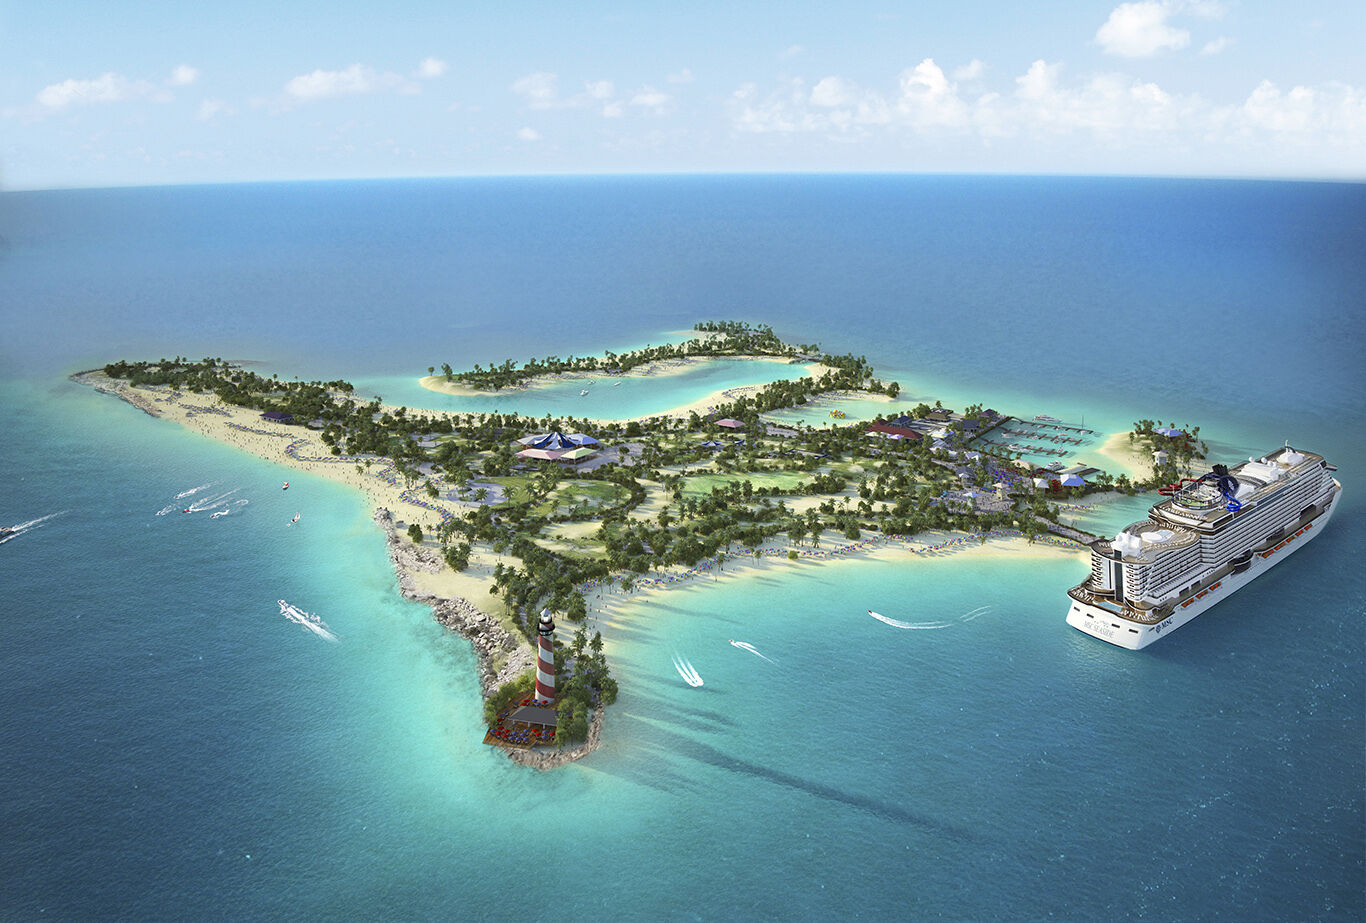 Ocean Cay MSC Marine Reserve where the ship docks at a special pier and is an extension of the island experience